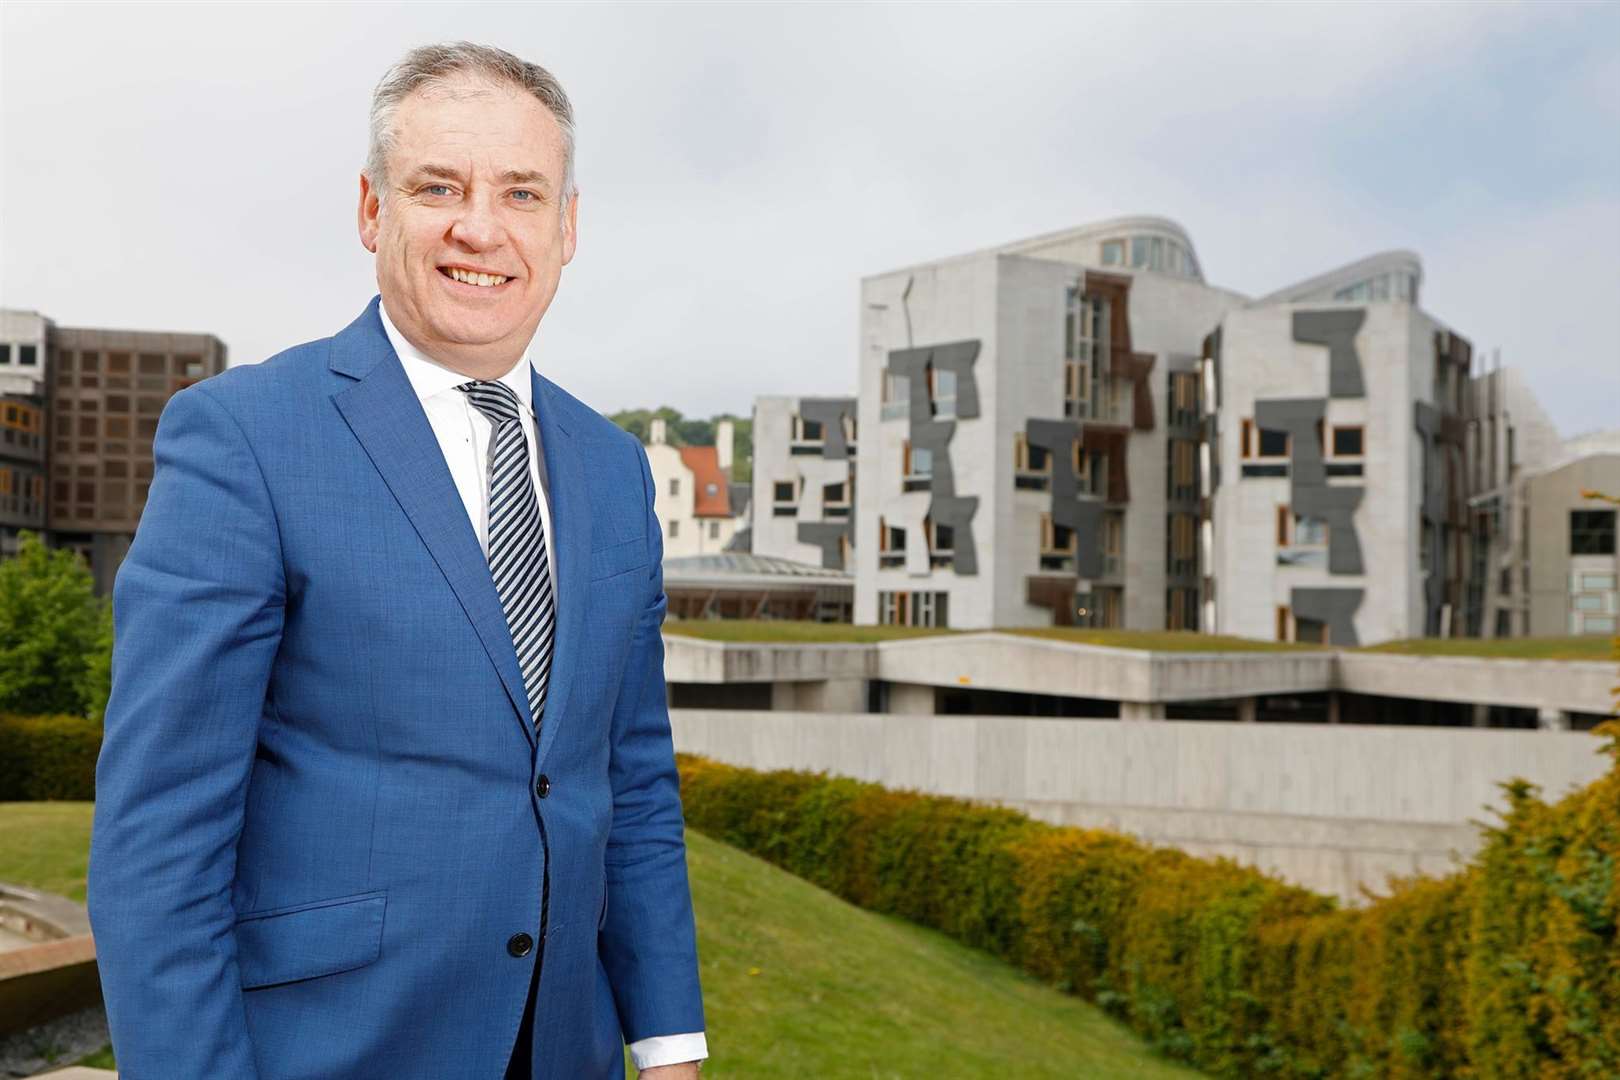 Richard Lochhead MSP: Community response to Covid-19 "inspirational and humbling". Picture: Andrew Cowan